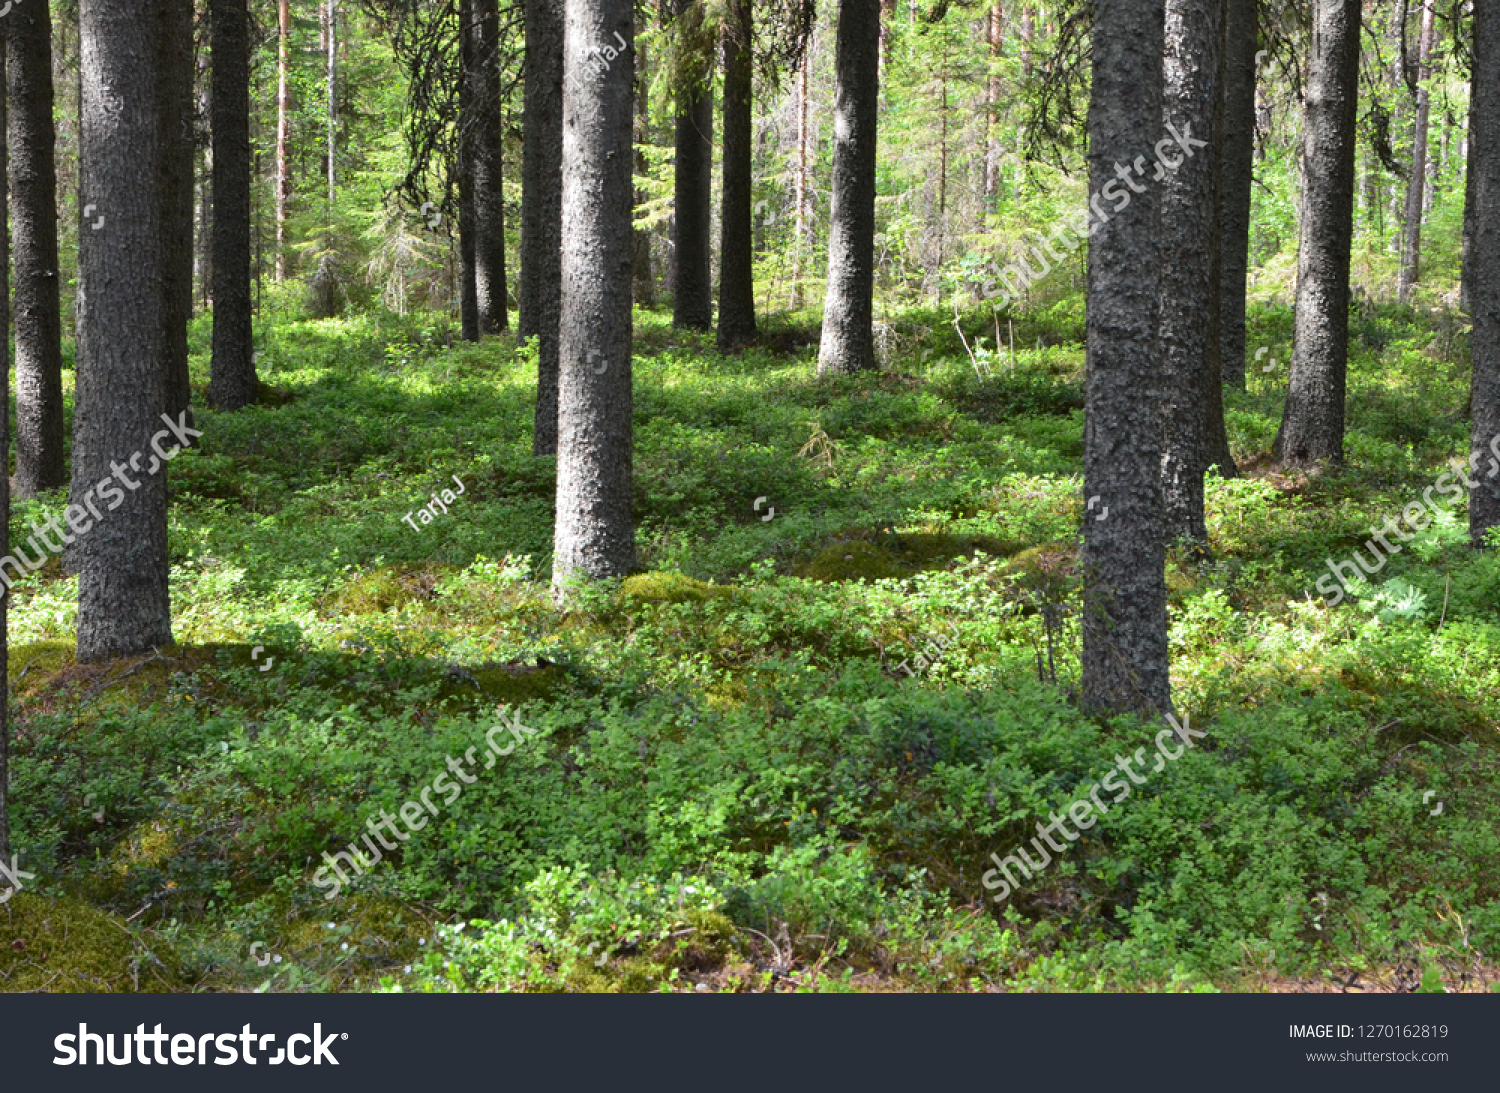 Old spruce wood forest with blueberry bushes in Finland. Spruce/Fir grows in the cold climate zone. Timber is a major export of Finland which can be used for construction and other industries. #1270162819